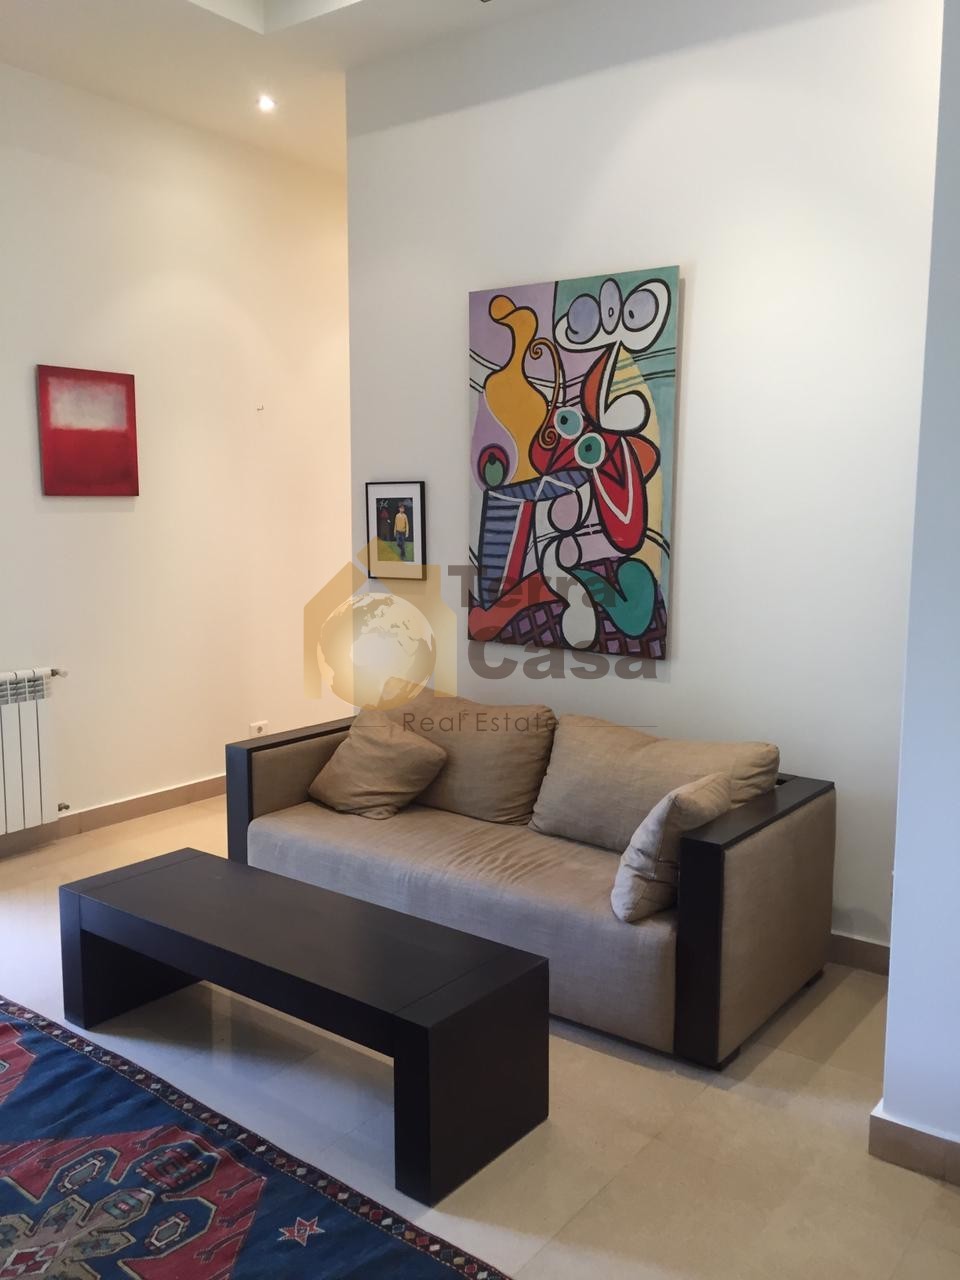 Luxurious fully furnished apartment cash payment. Ref# 2636